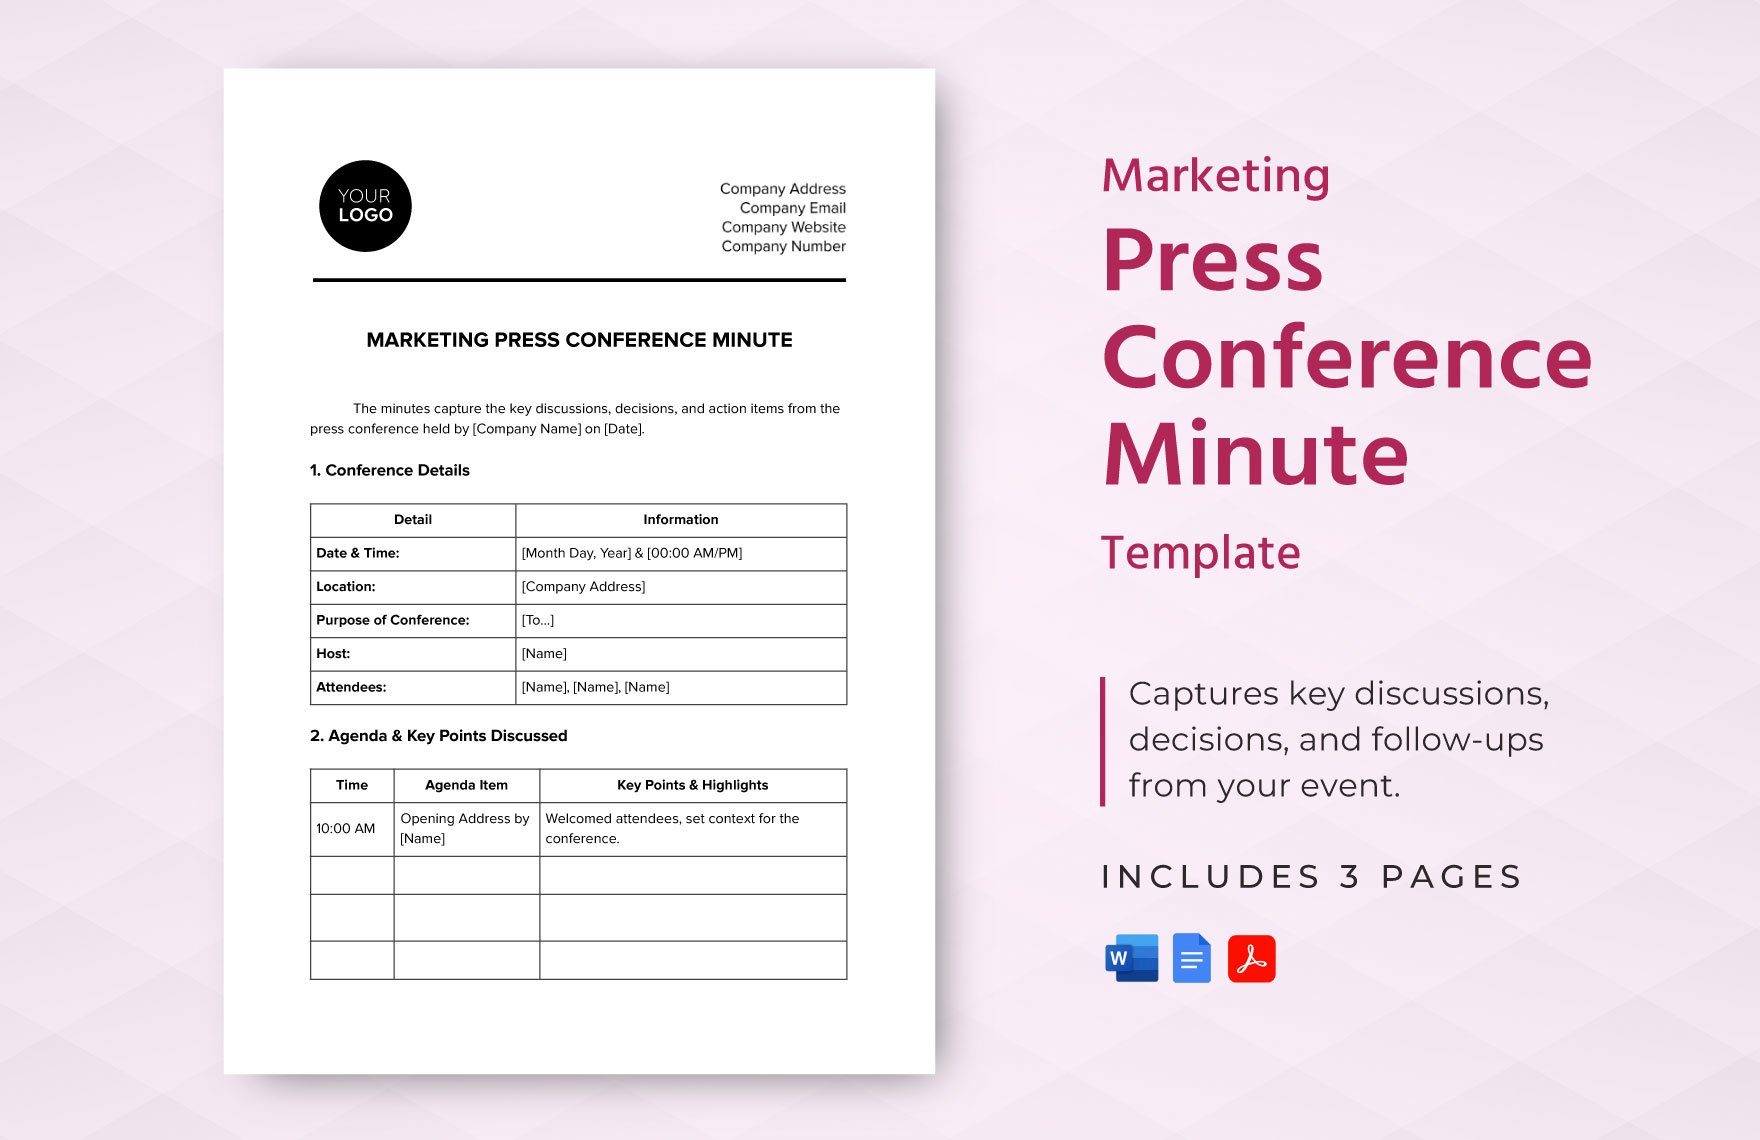 Marketing Press Conference Minute Template in Word, Google Docs, PDF